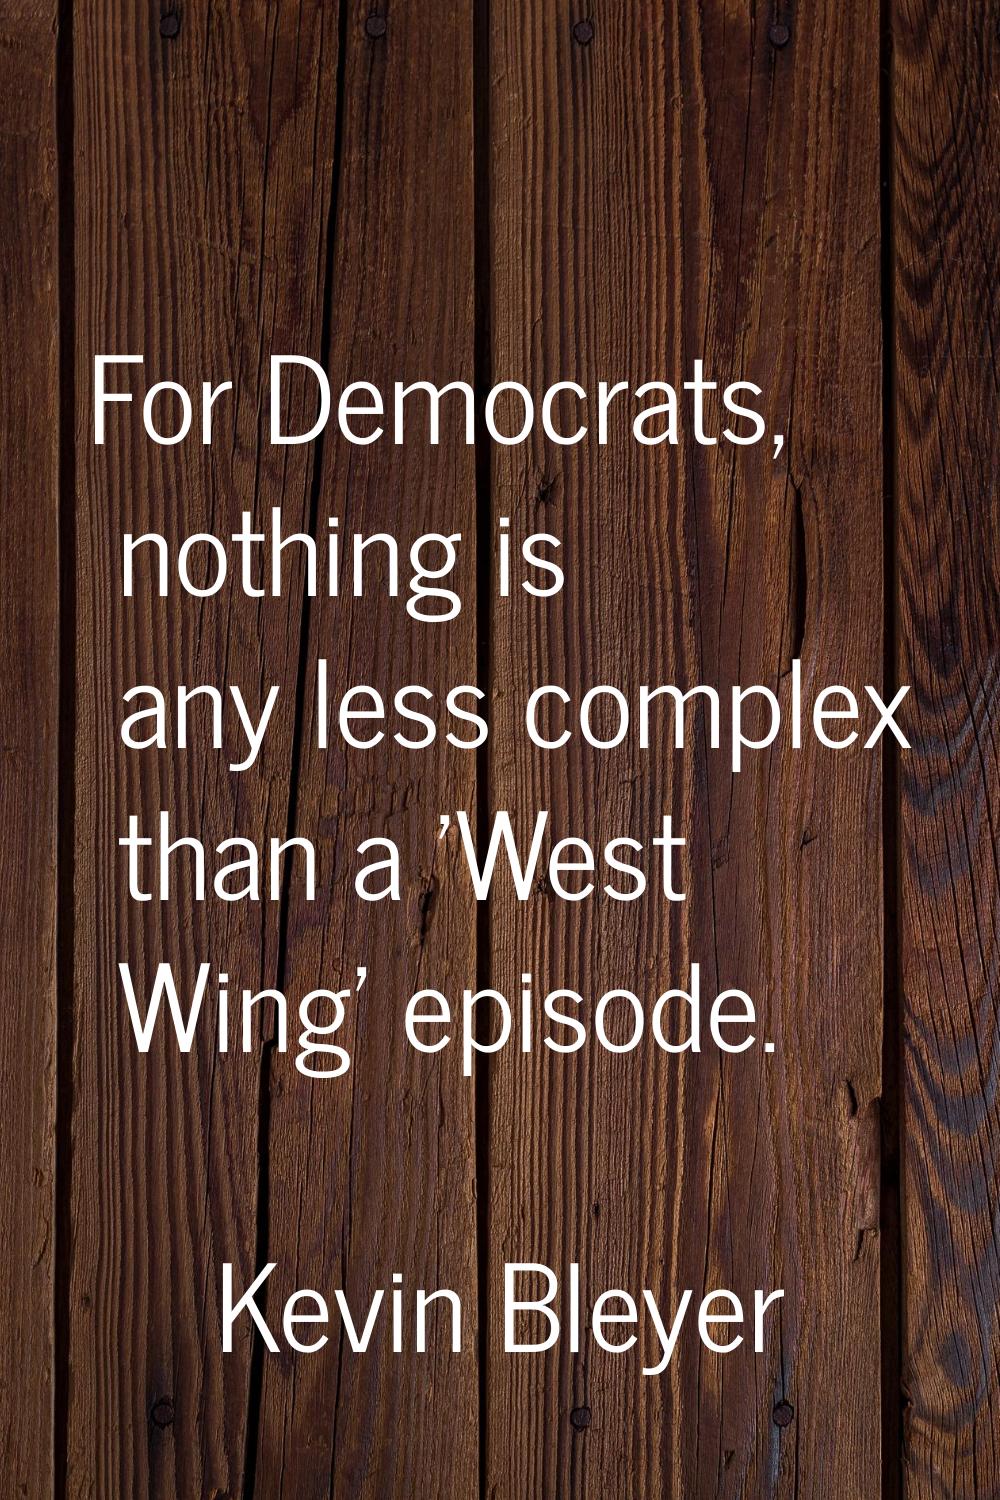 For Democrats, nothing is any less complex than a 'West Wing' episode.